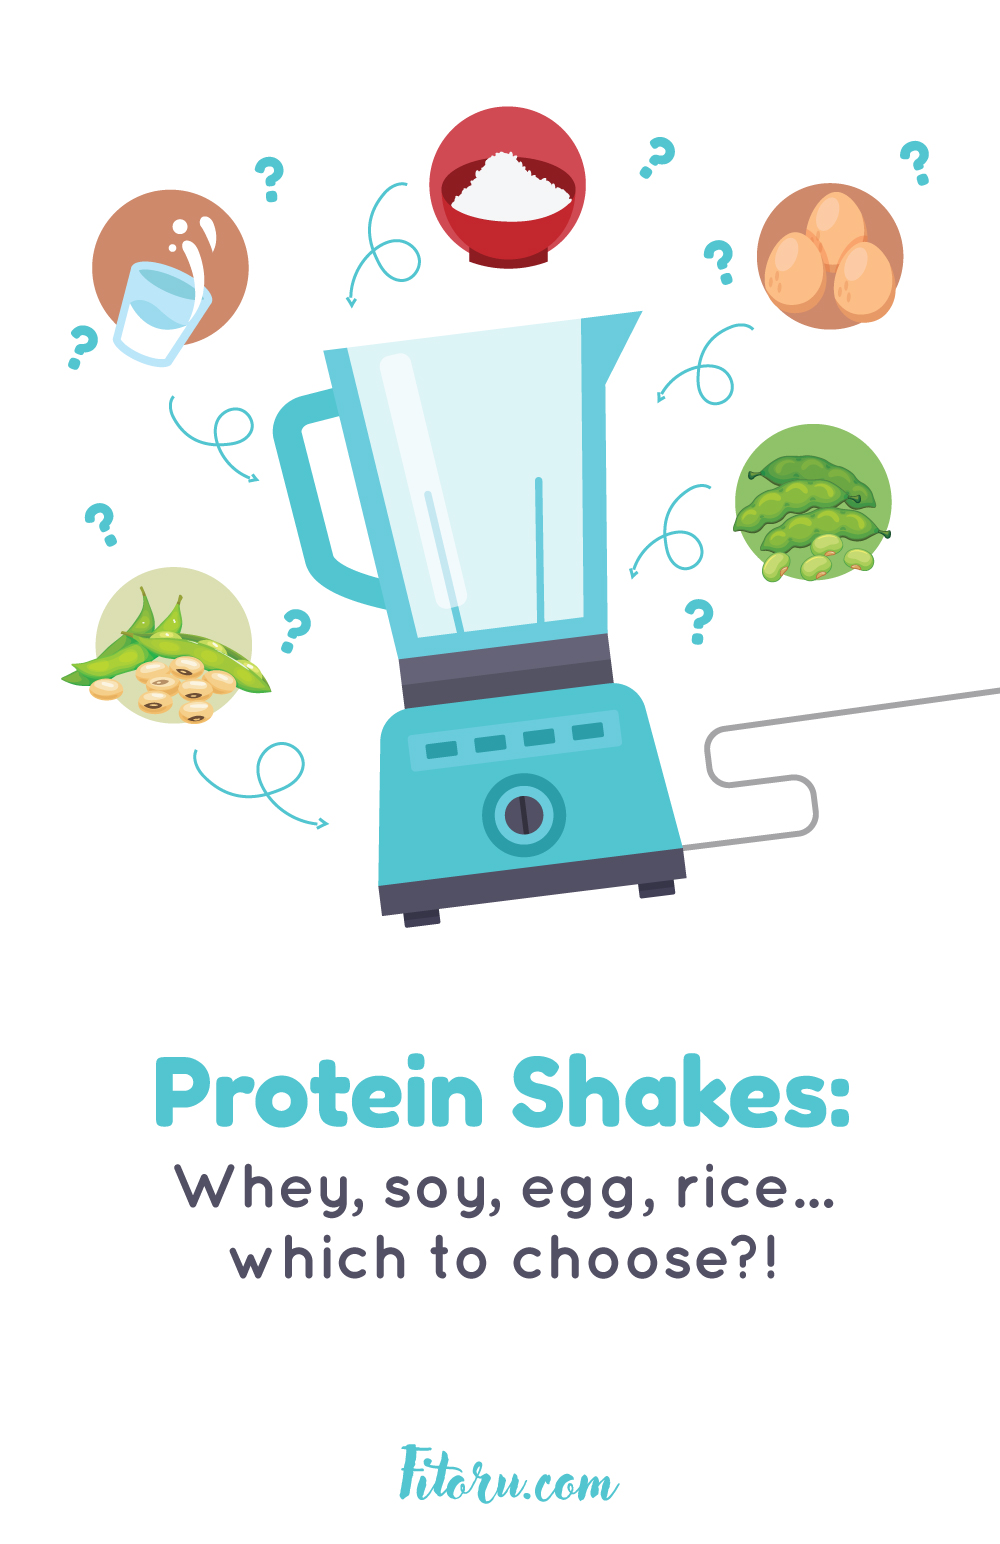 Explore the main ingredients in protein shakes.